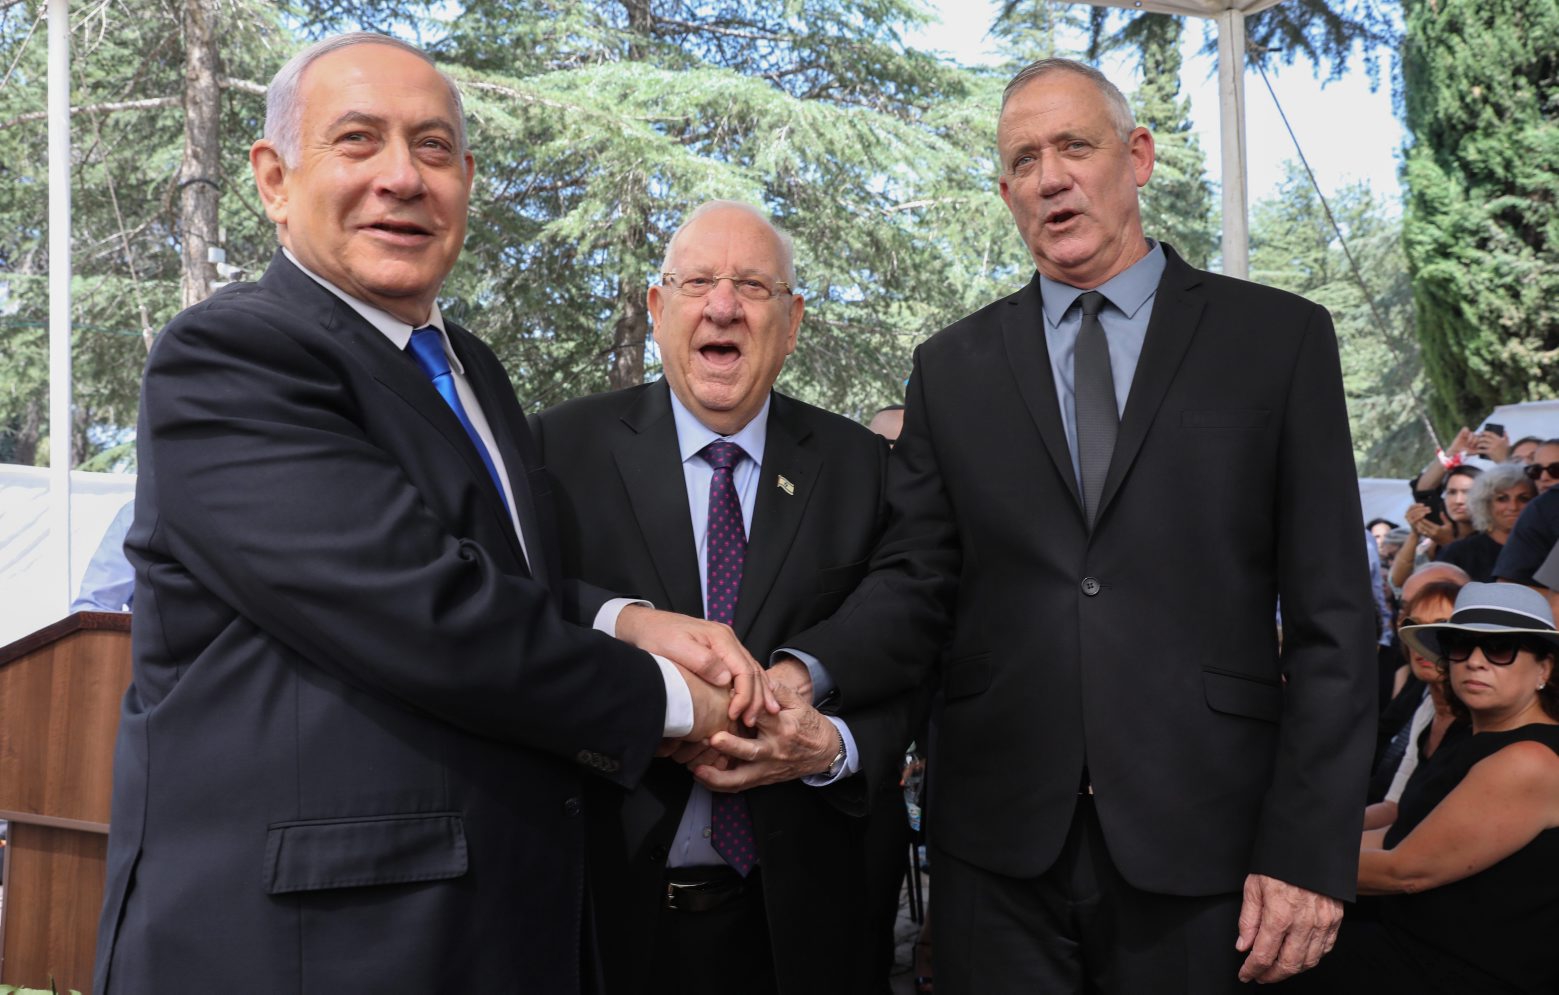 epa07852802 (L-R) Israeli Prime Minister Benjamin Netanyahu, Israeli President Reuven Rivlin and Benny Gantz, former Israeli Army Chief of Staff and chairman of the Blue and White Israeli centrist political alliance join hands as they attend a memorial service for late Israeli president Shimon Peres at Mount Herzl, Israel's national cemetery, in Jerusalem, 19 September 2019.  EPA/ABIR SULTAN ISRAEL ELECTIONS